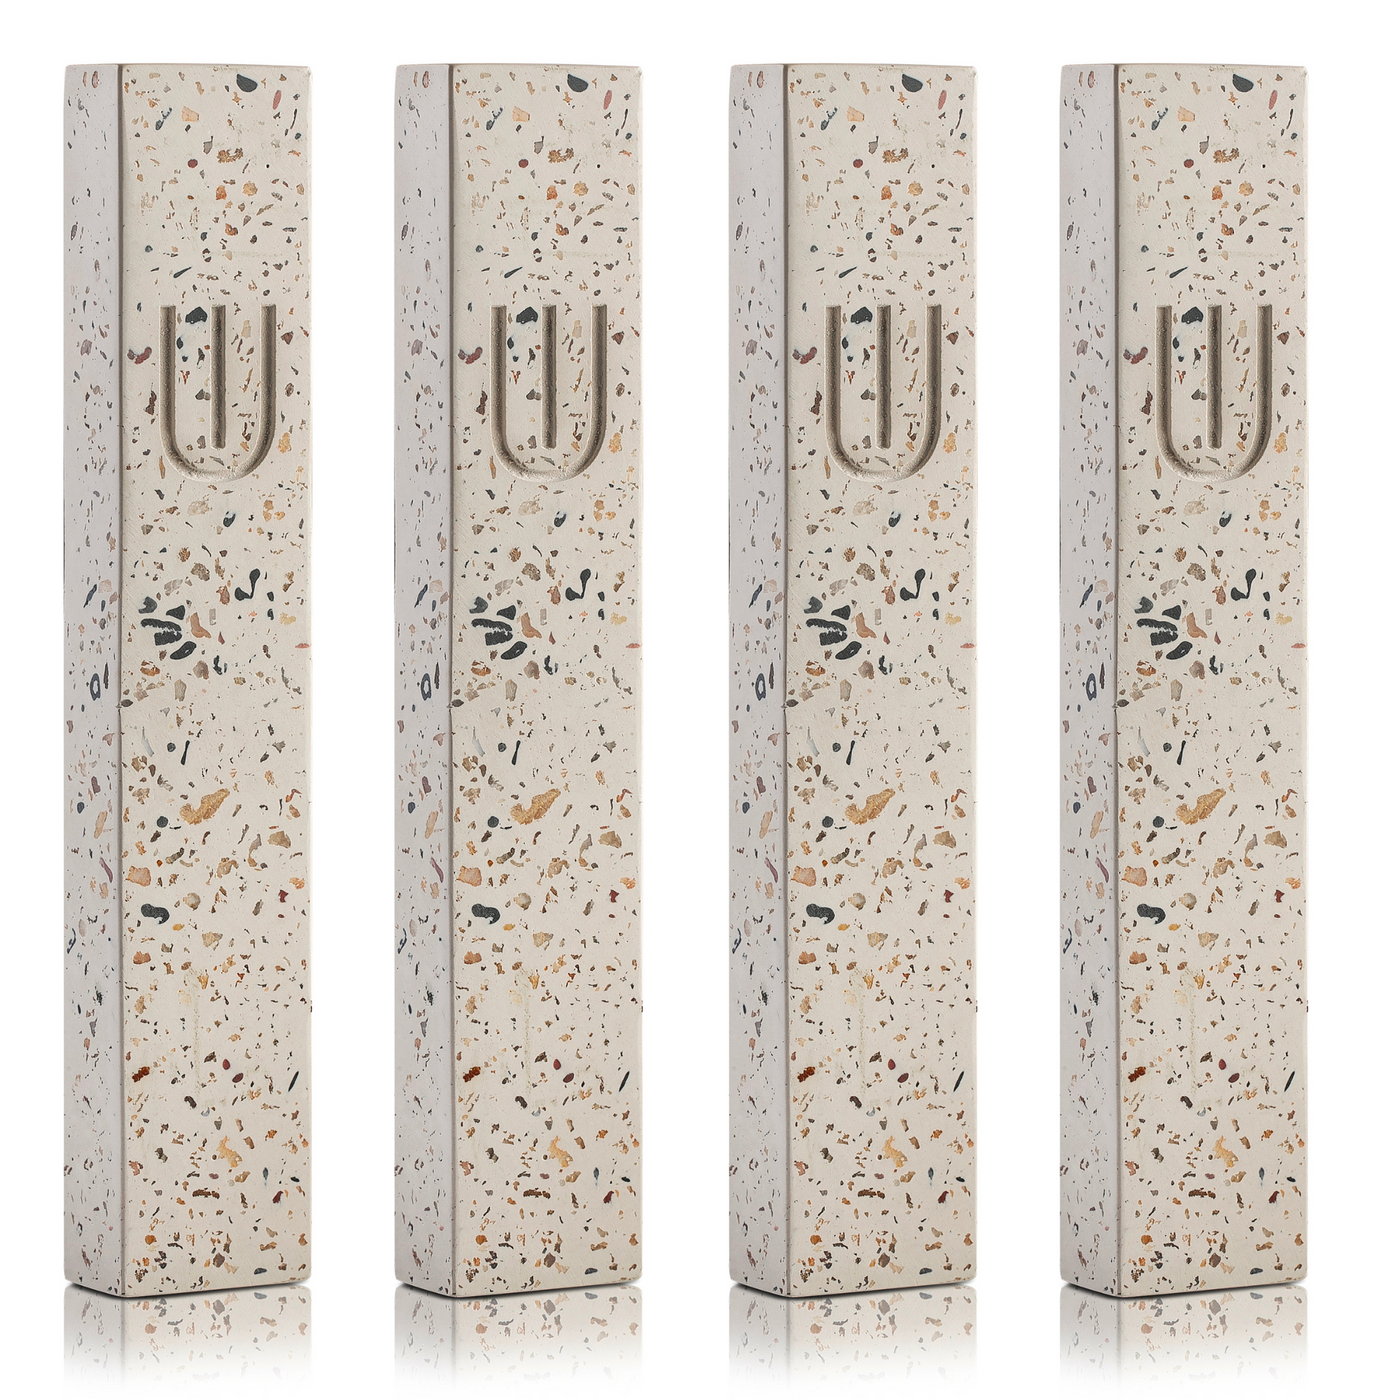 Set of Concrete Mezuzahs for Entry Doors and Rooms in Stone Terrazzo - Timeless